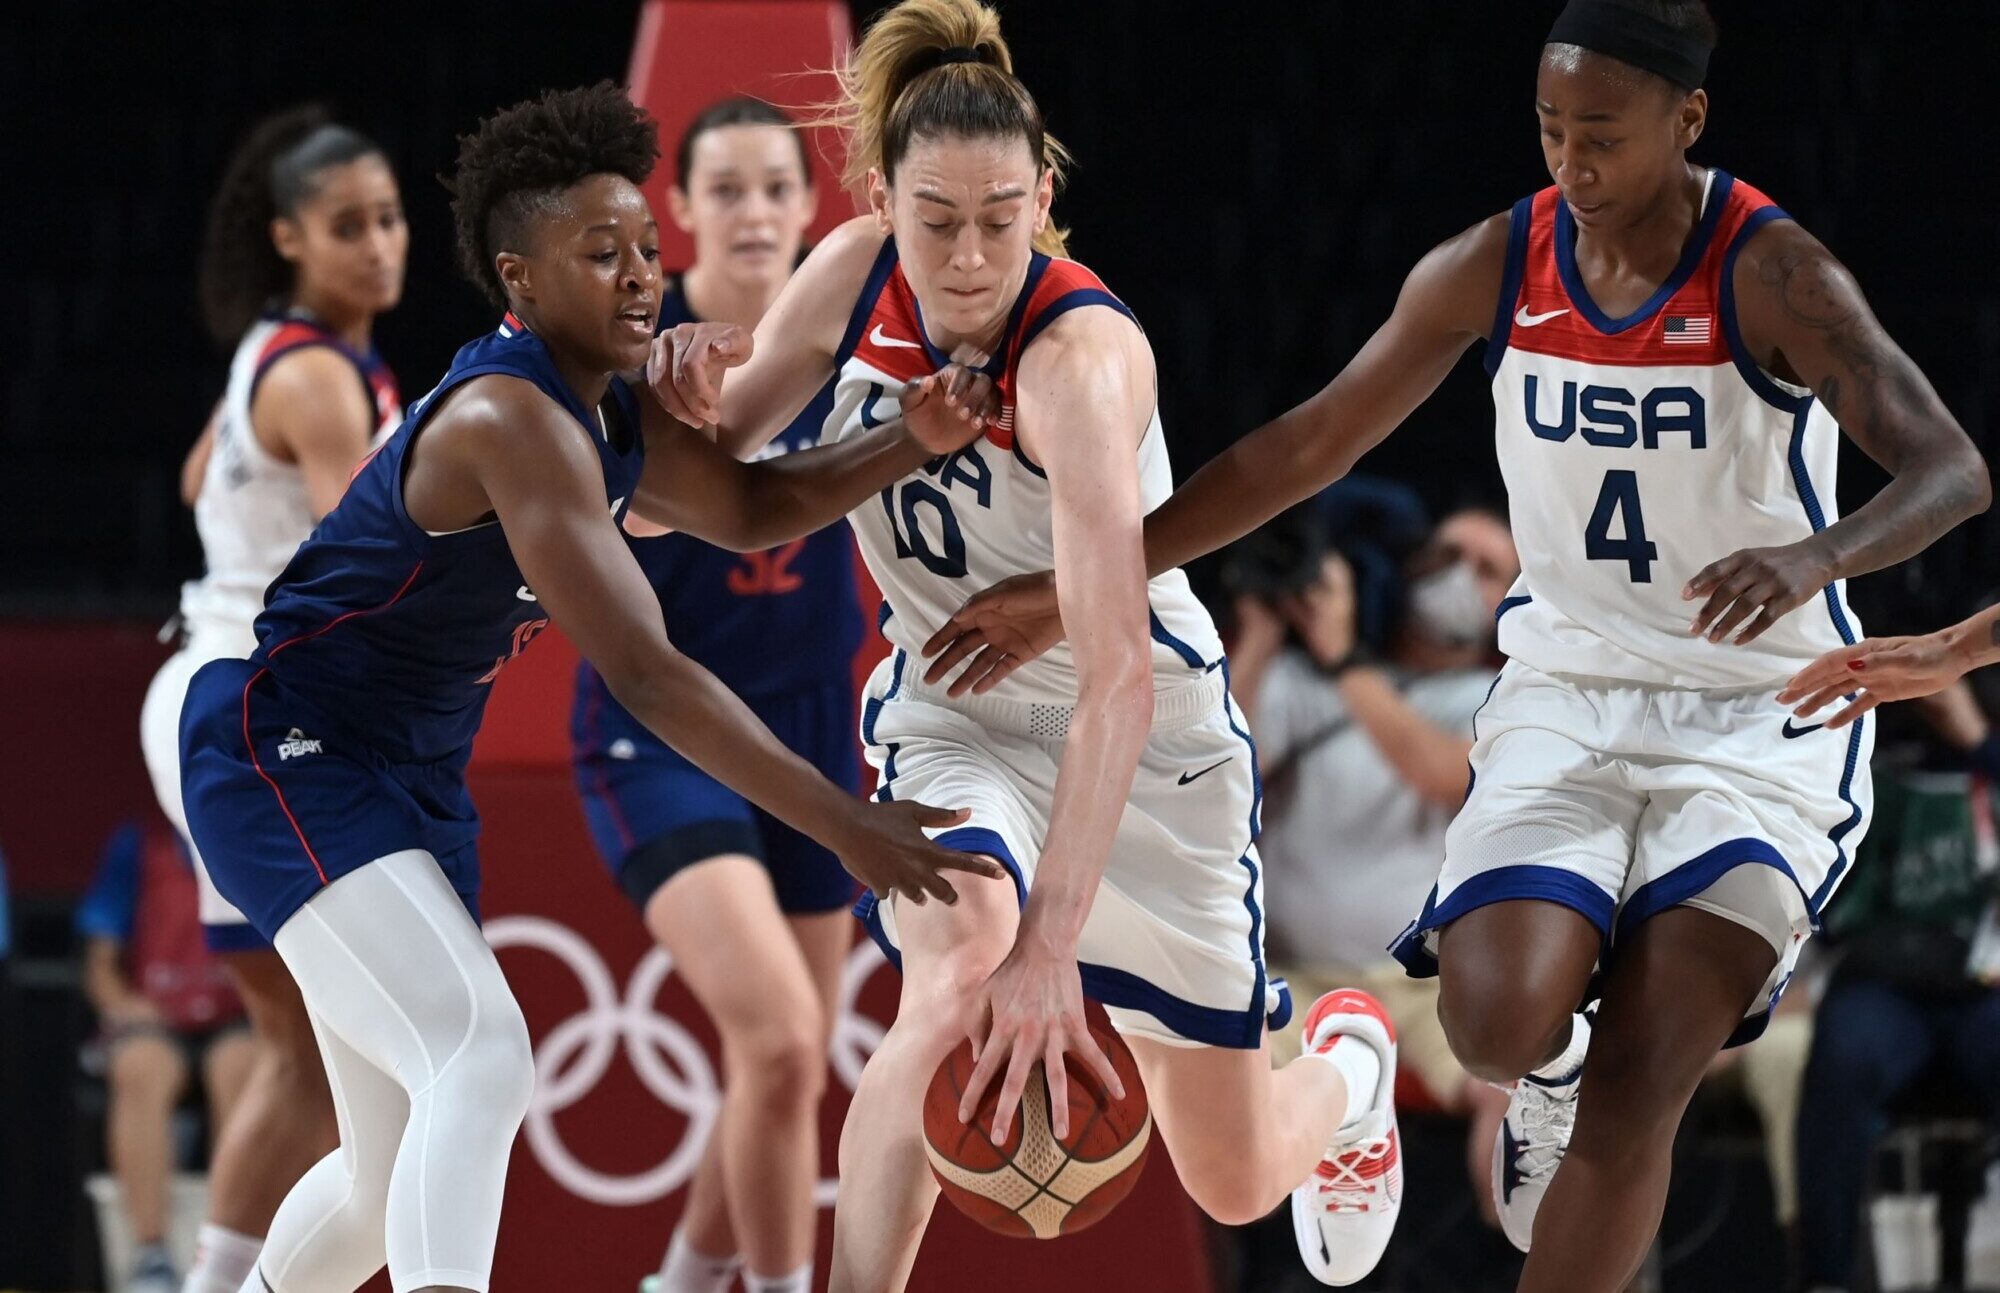 Team USA Women’s Basketball to Play for Gold After Winning SemiFinal